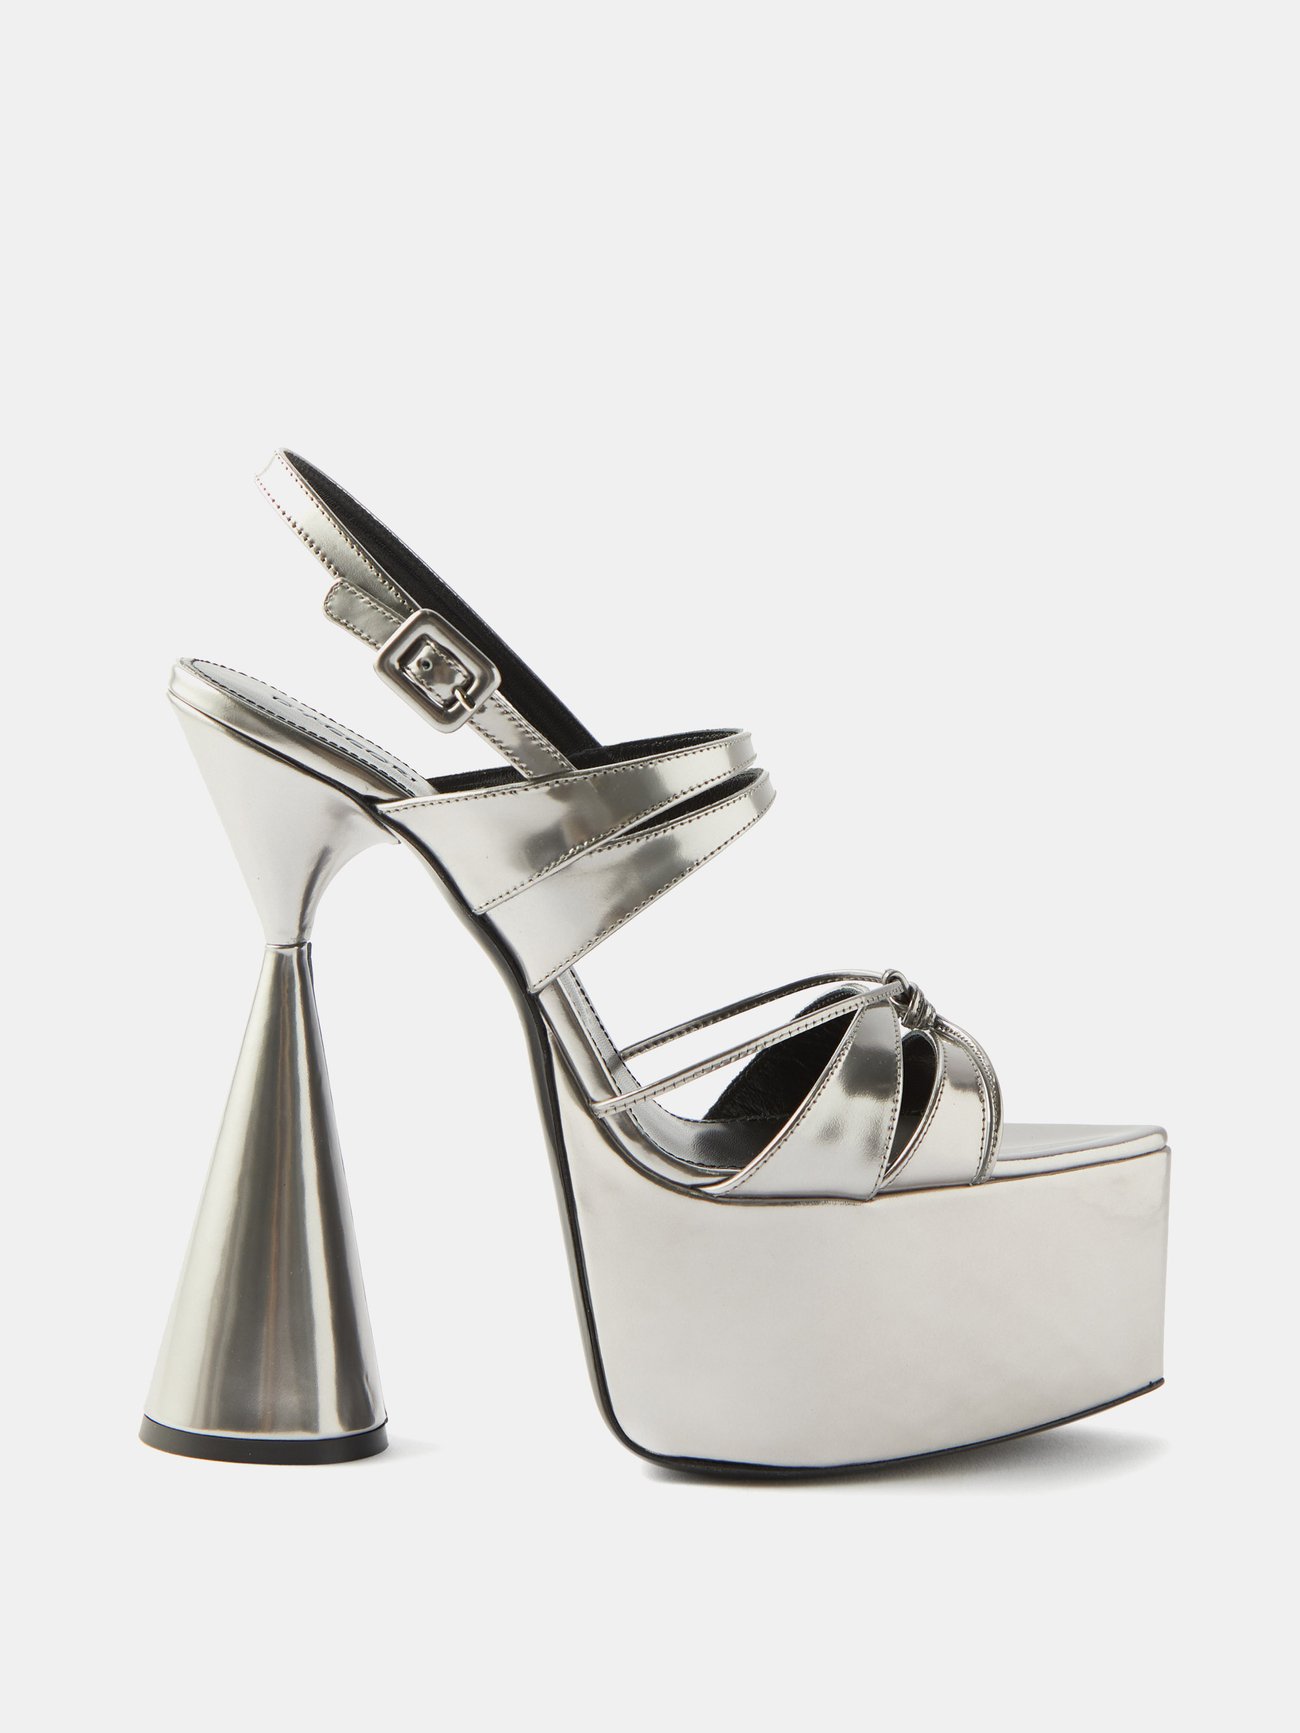 These new for SS22 D’ACCORI silver Belle platform sandals are Italian-made from leather with a unique towering cone heel and pointed platform toe. The foot is supported by multiple straps over the toe and arch and an adjustable strap around the back of the ankle. 